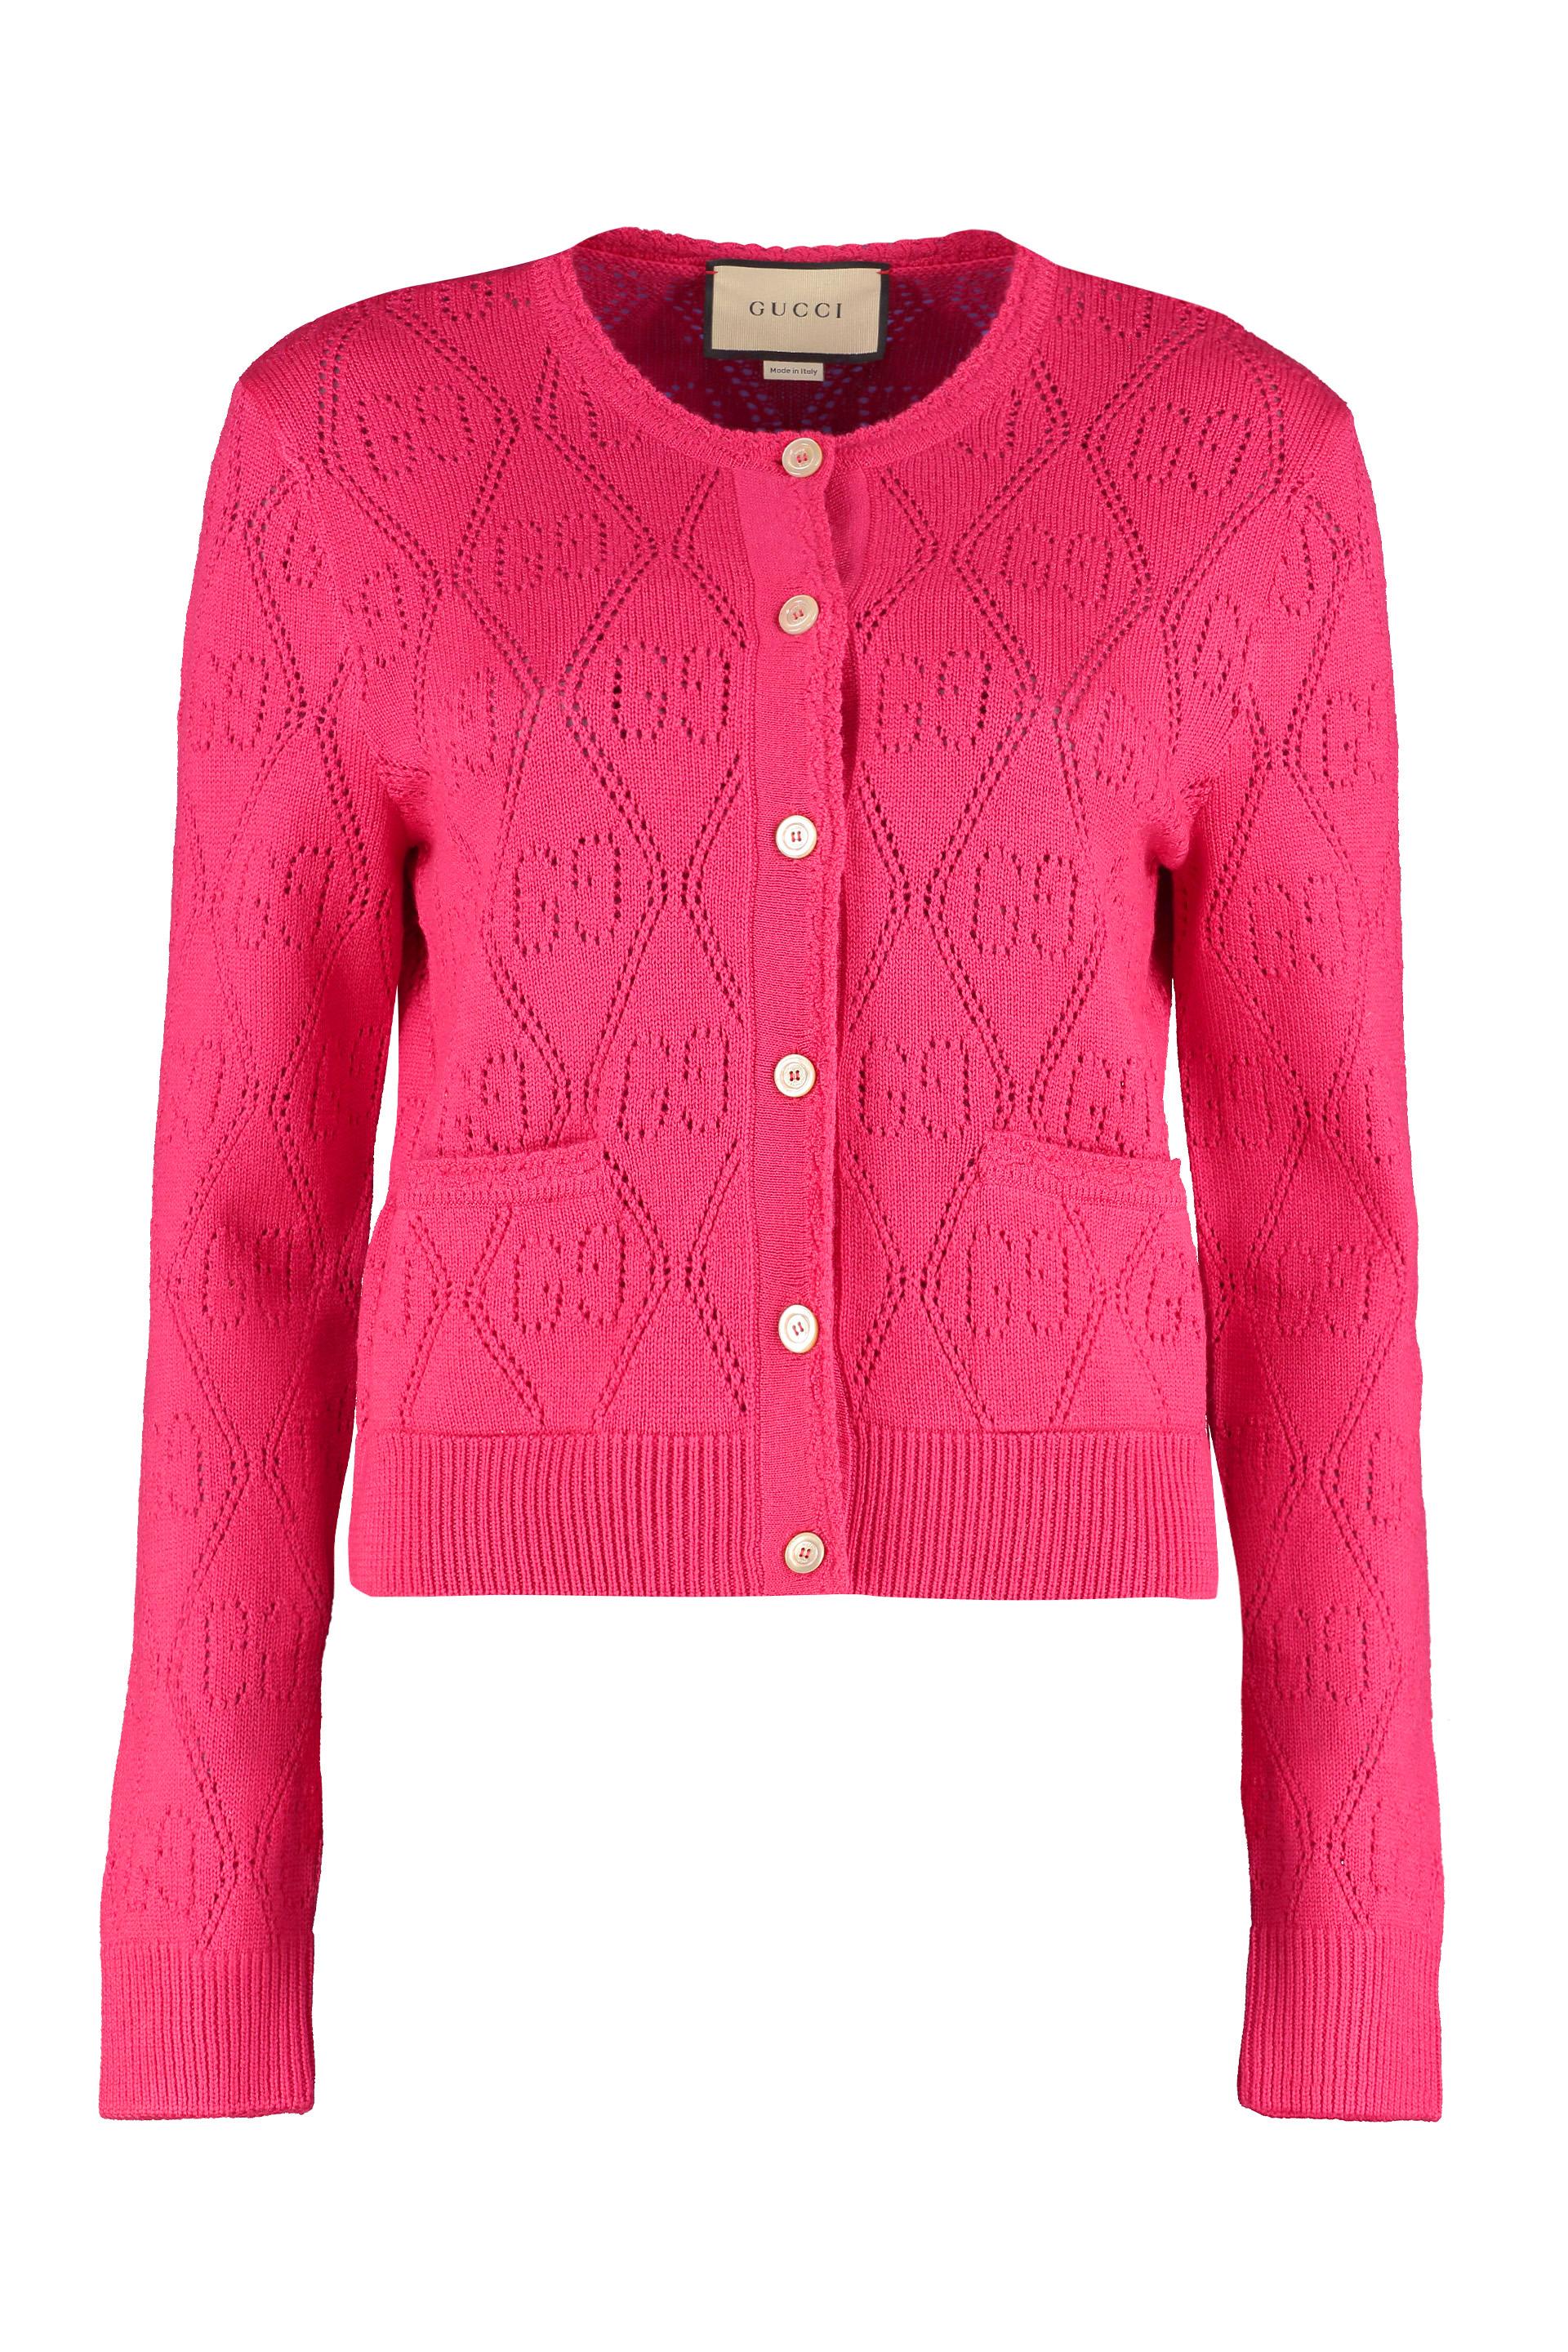 Gucci Open-work Cardigan With GG Pattern in Pink | Lyst